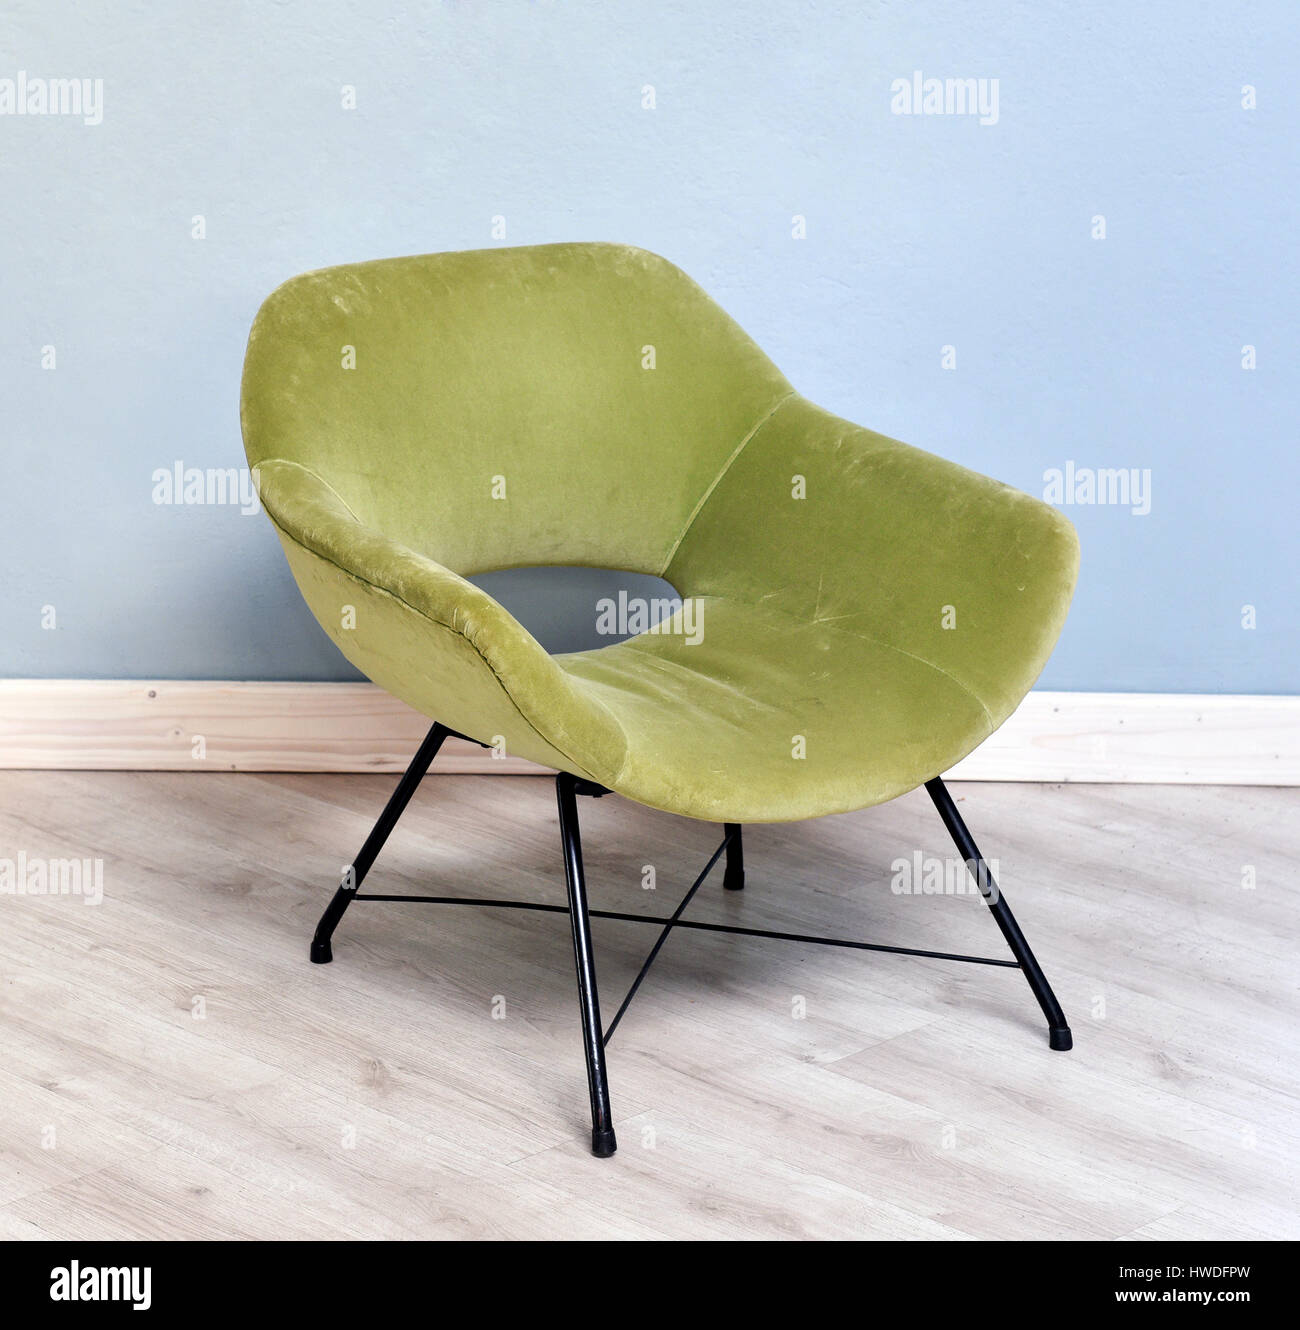 Furniture Still Life of Small Retro Green Velvet Plush Reclining Chair with Black Metal Legs in Room with Wood Floor and Light Blue Wall Stock Photo